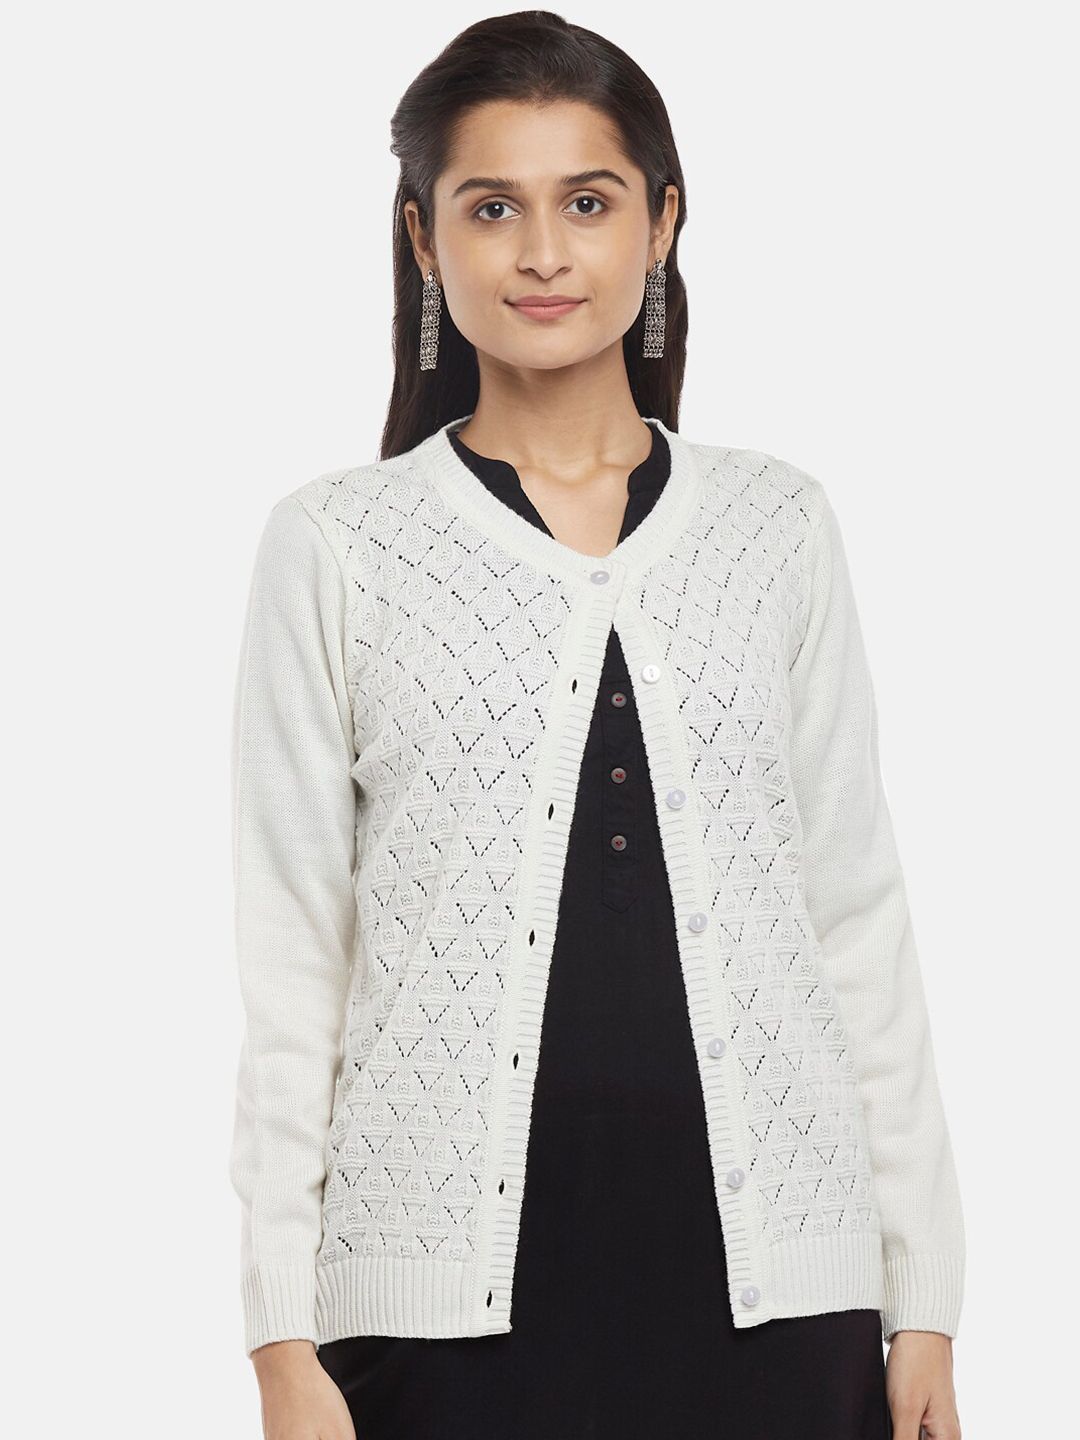 RANGMANCH BY PANTALOONS Women Off White Pure Acrylic Cardigan Price in India